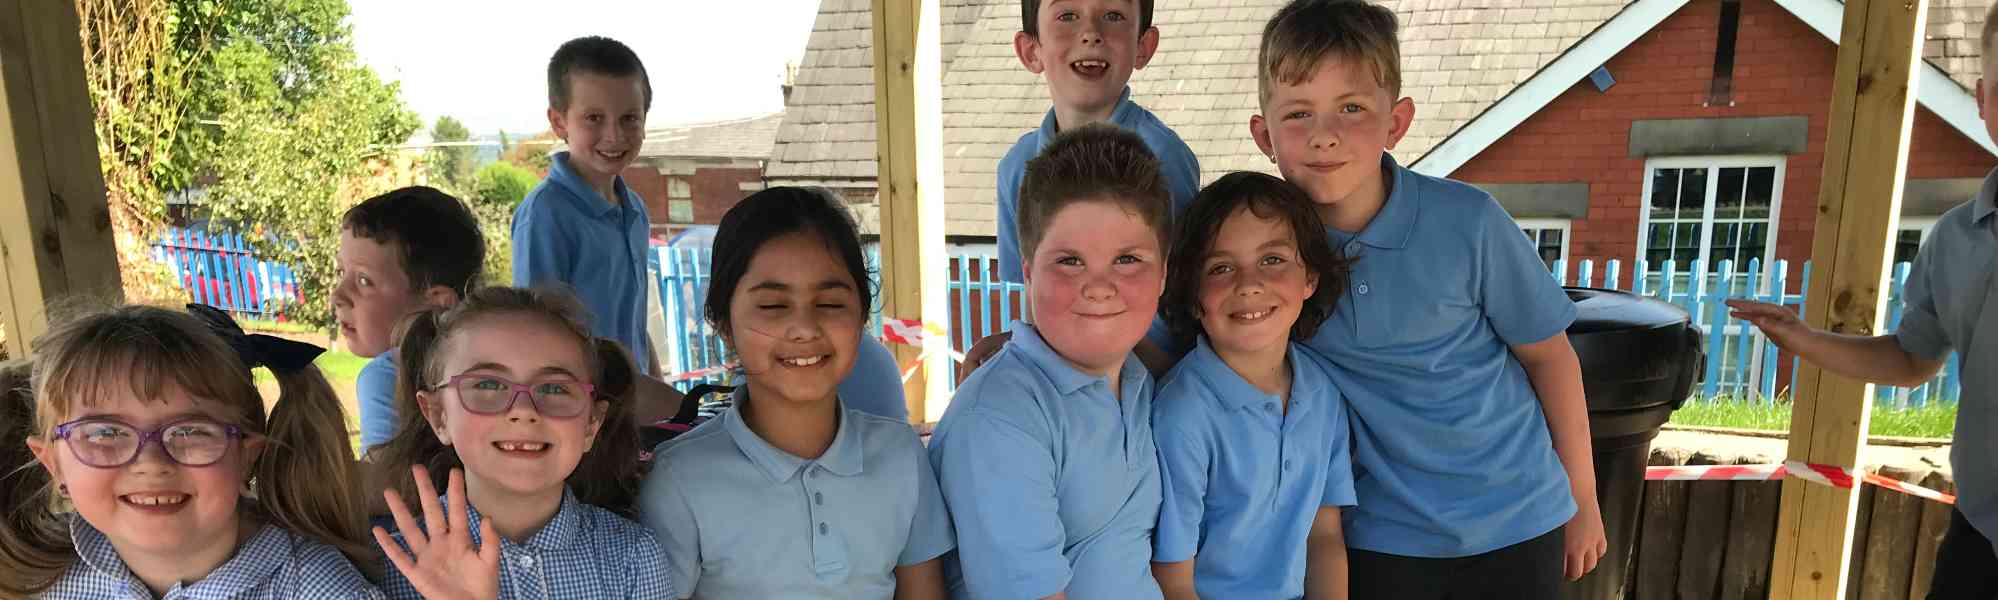 Pupils at Christ Church C.E. Primary School - RE page